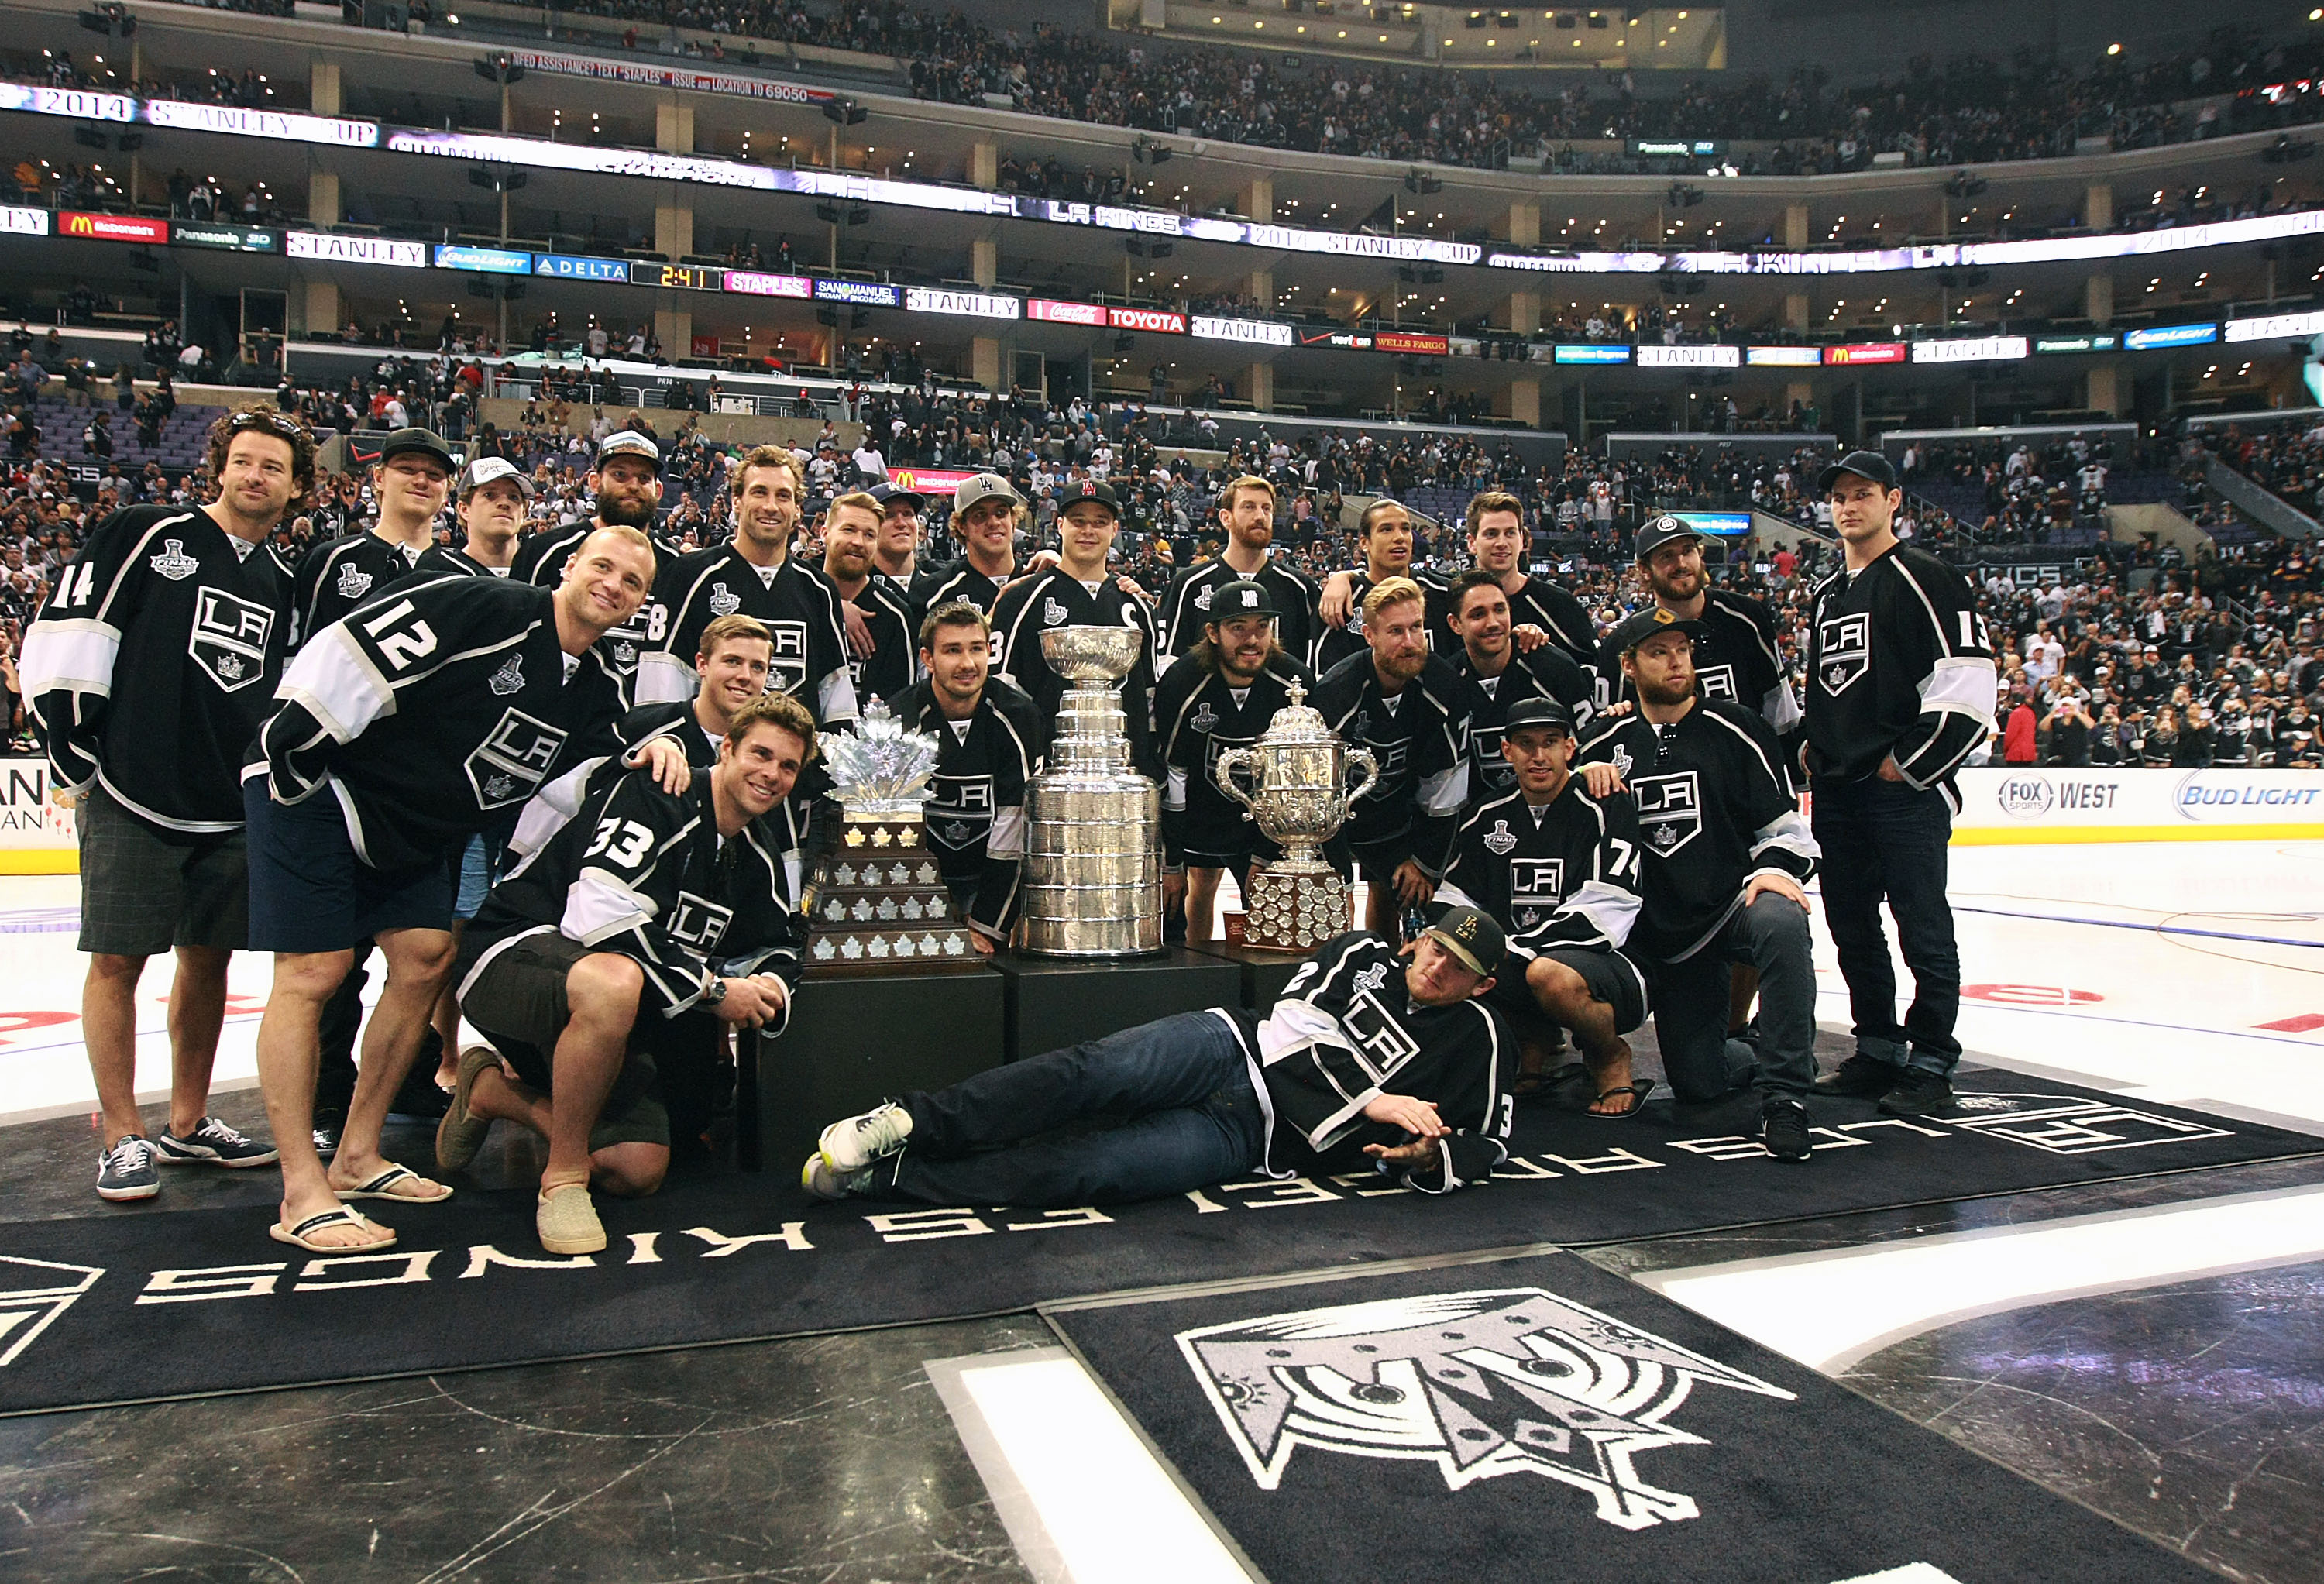 Los Angeles Kings: Quest to Repeat as Champions - Gentlemens Guide LA